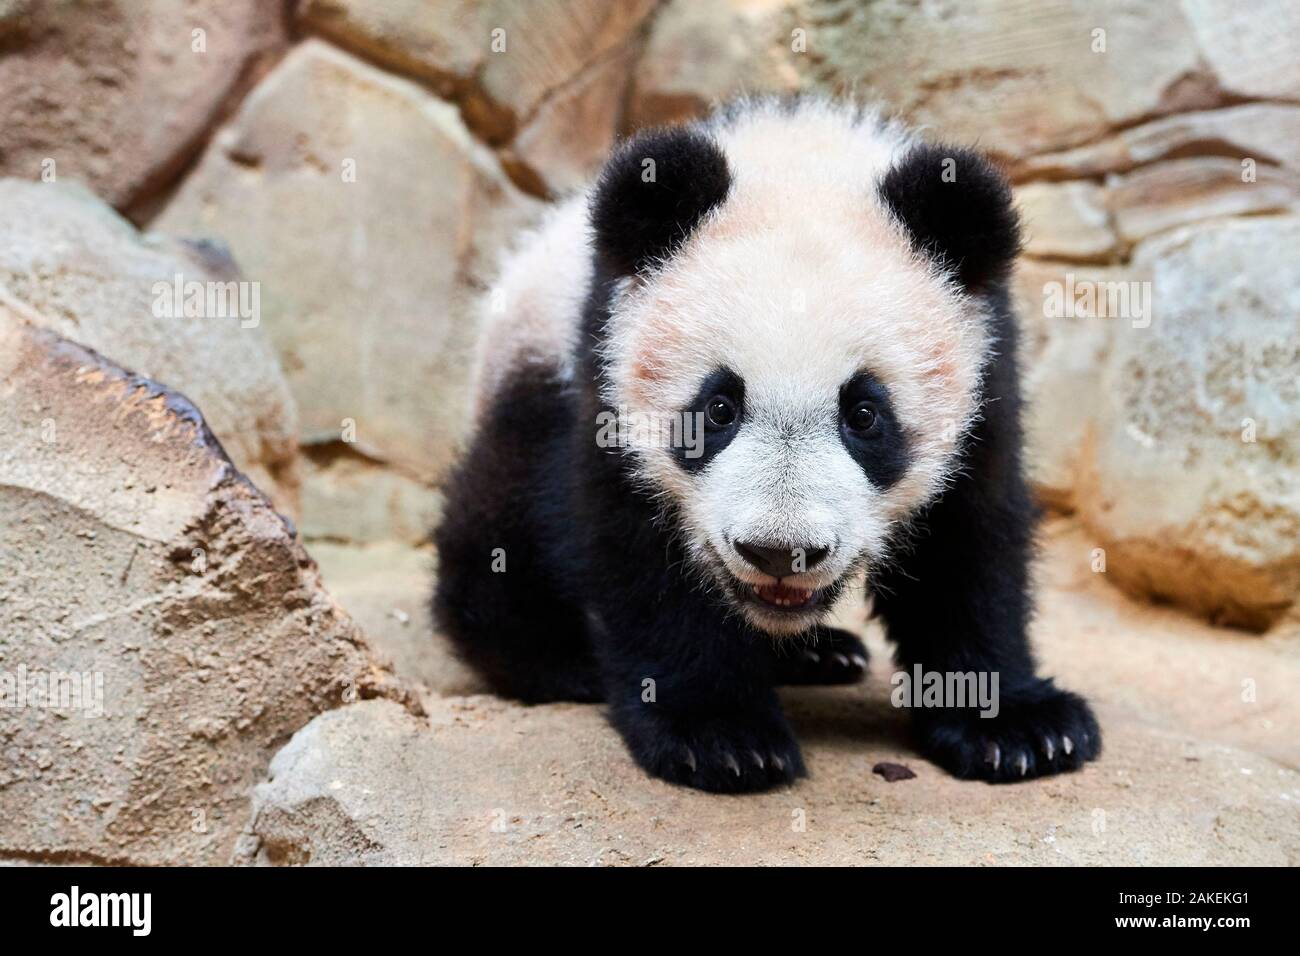 Portrait of Giant panda cub (Ailuropoda melanoleuca) captive. Yuan Meng, first Giant panda ever born in France, now aged 8 months, Beauval Zoo, France Stock Photo